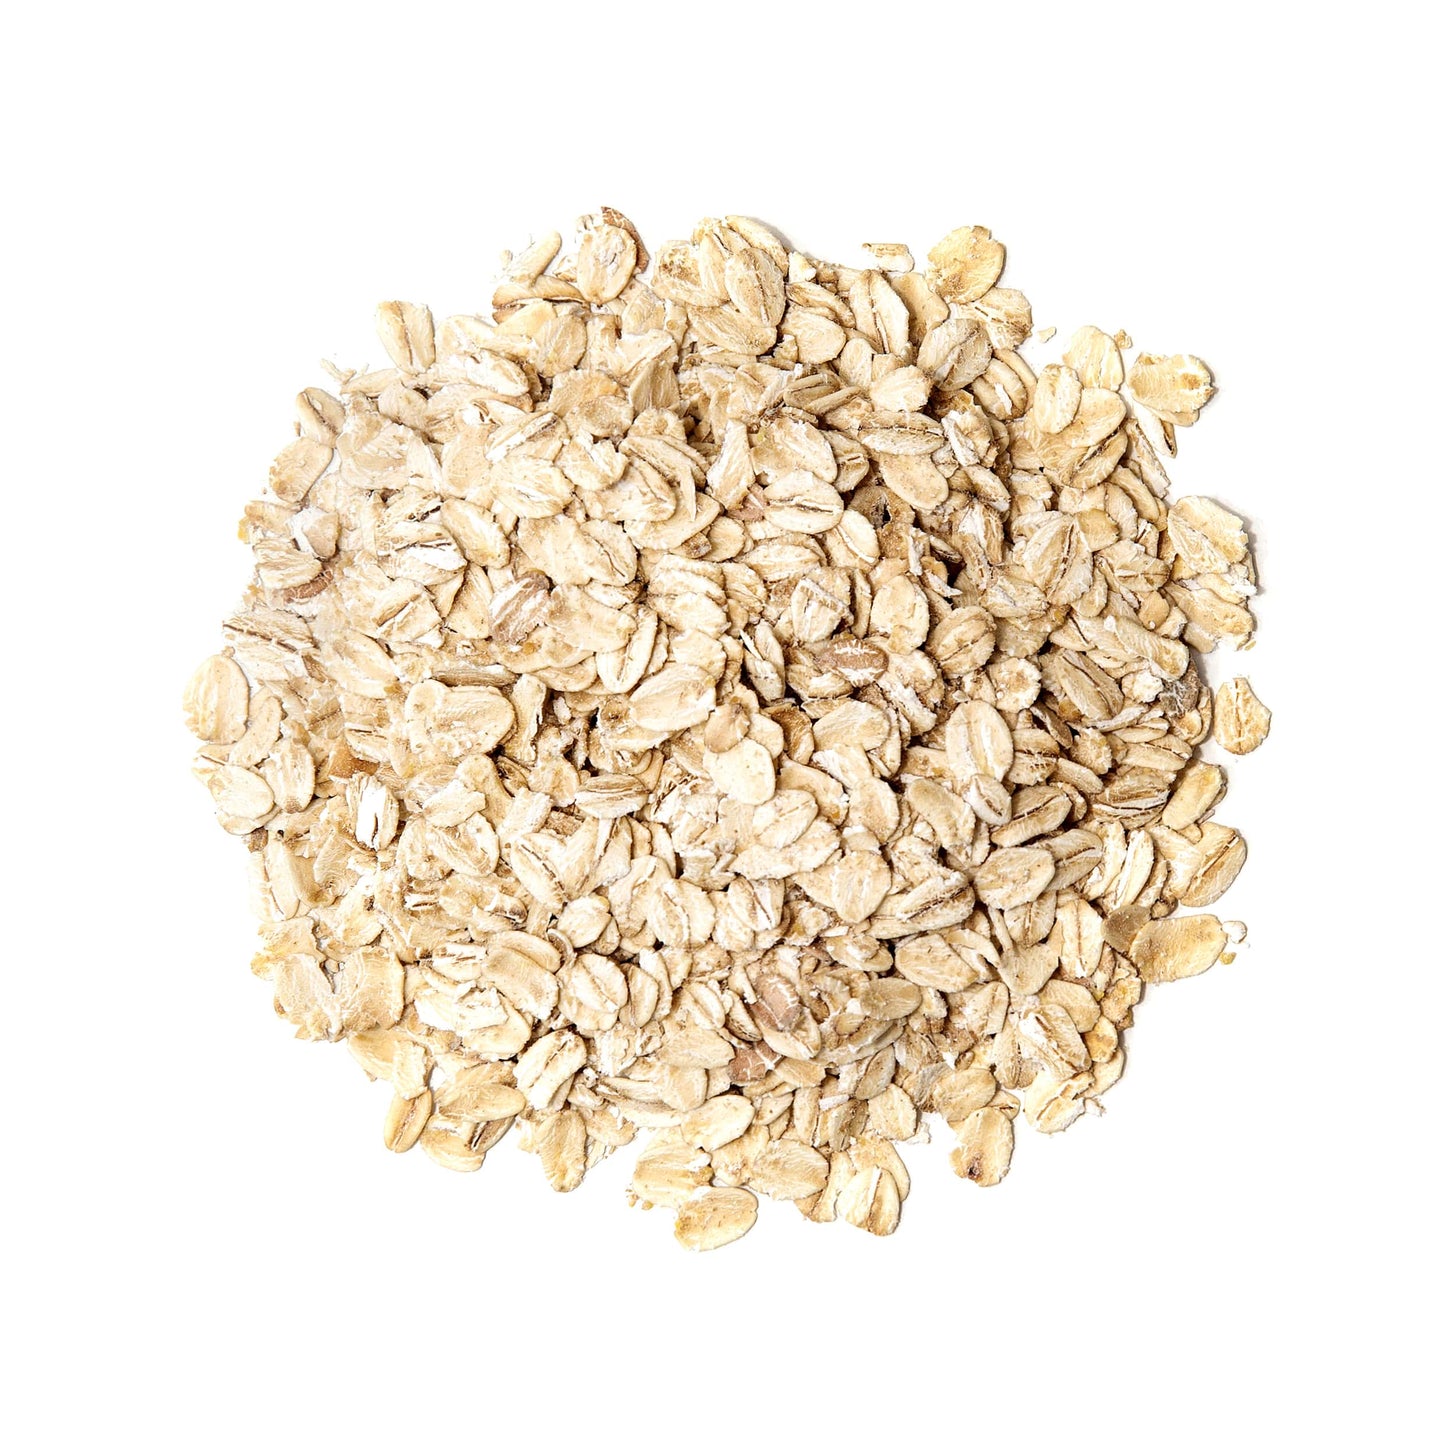 Organic Instant Rolled Oats – Ready in 1 Minute Non-GMO Whole Grain Oatmeal. Good Source of Fiber and Protein. Great Quick Cook and Overnight Oats for Nutritious Breakfast